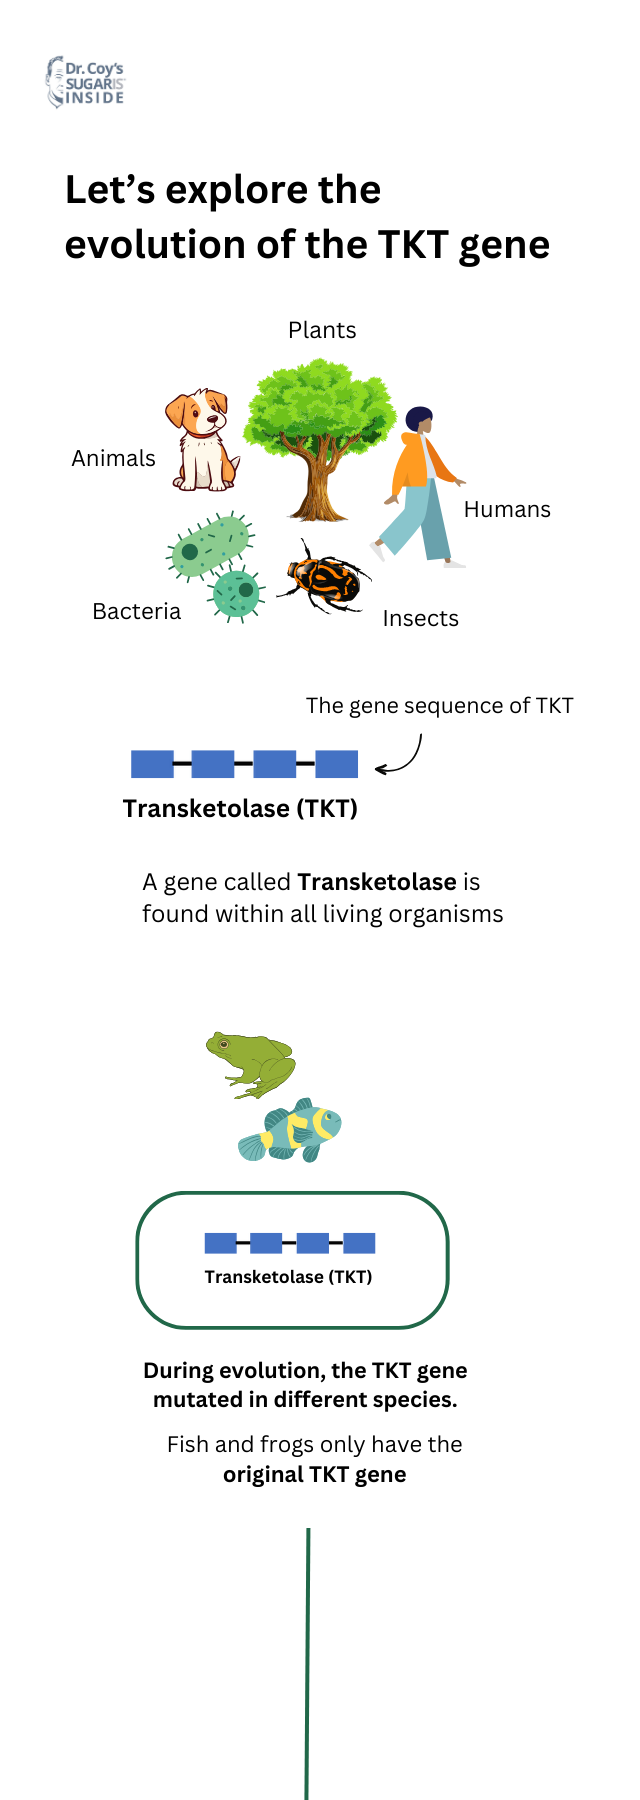 Flow infographic showing the evolution of the Transketolase gene across all living organisms